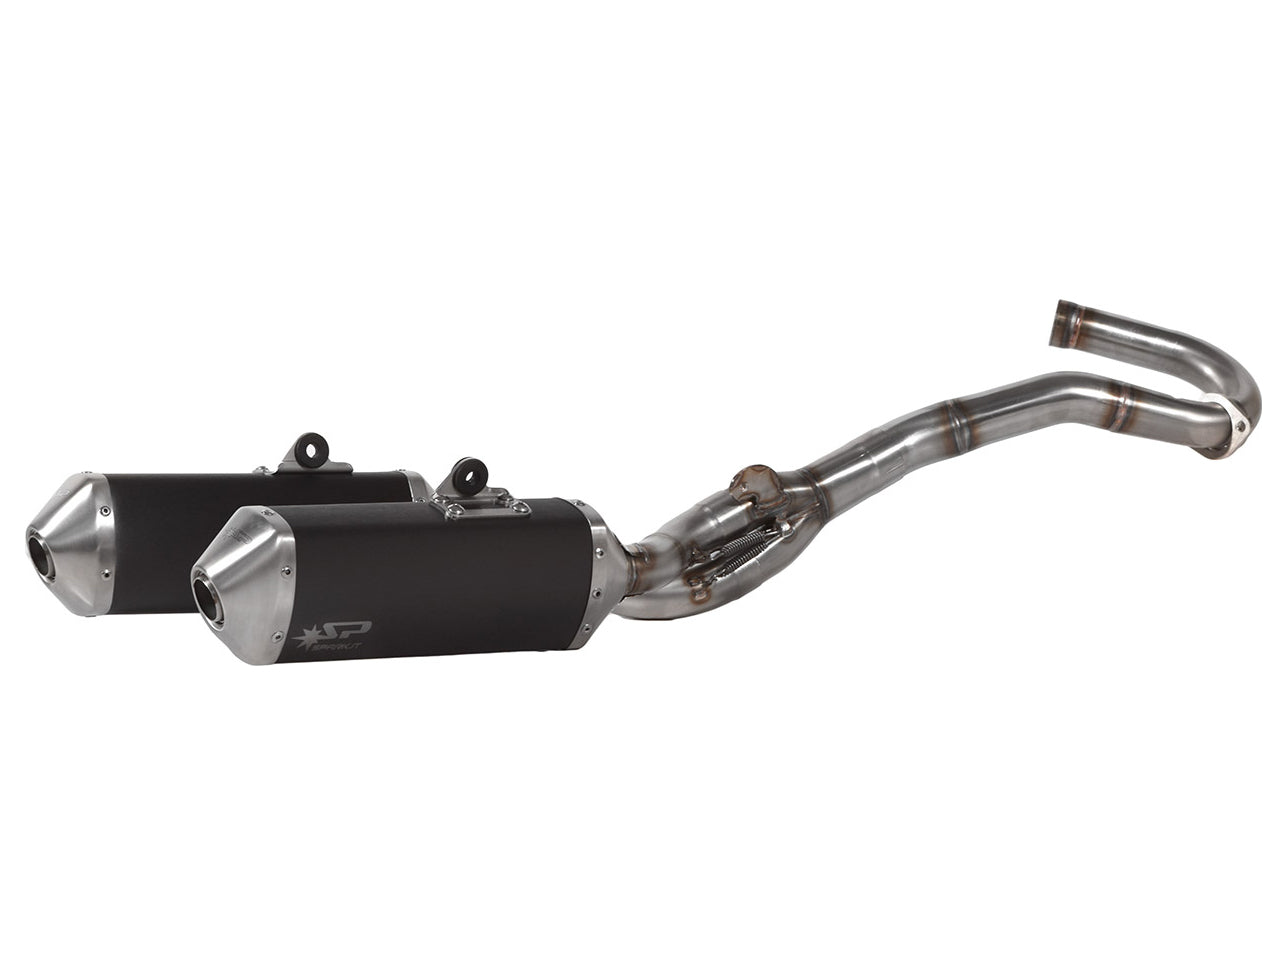 SPARK GHO8006 Honda CRF450 (15/16) Full Exhaust System "Off Road" (racing)